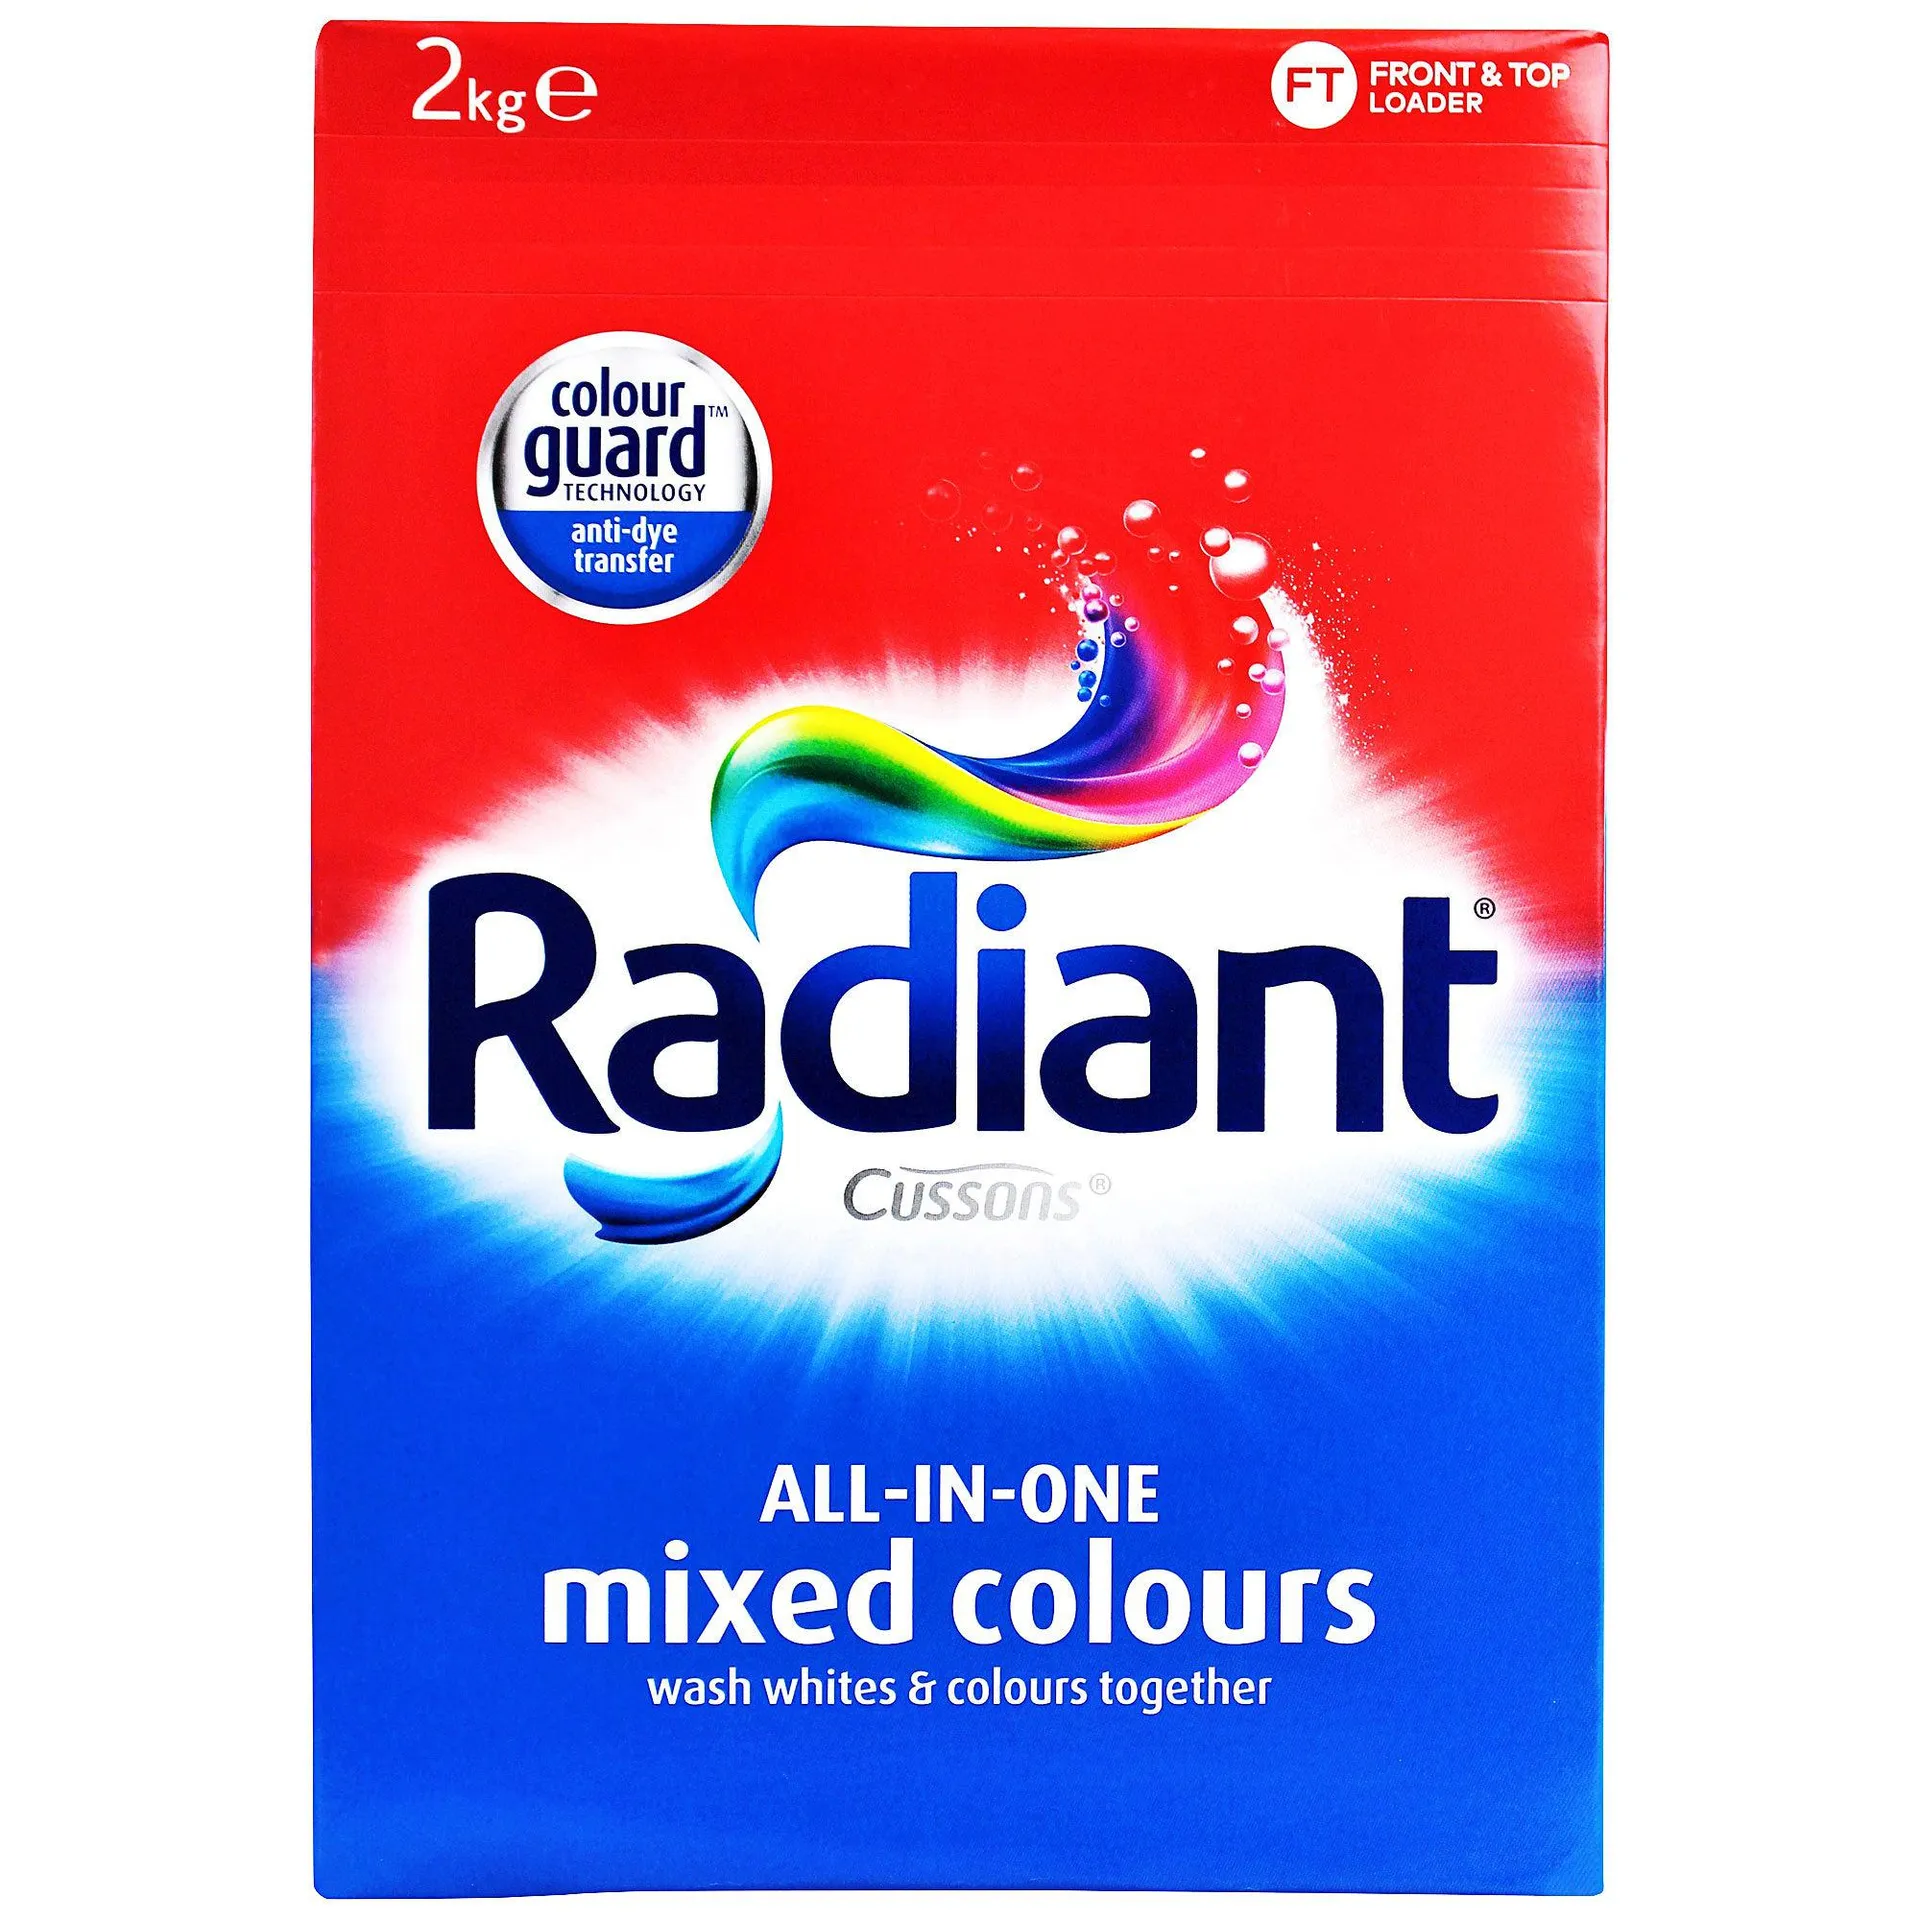 Radiant All-in-One Mixed Colours Washing Powder